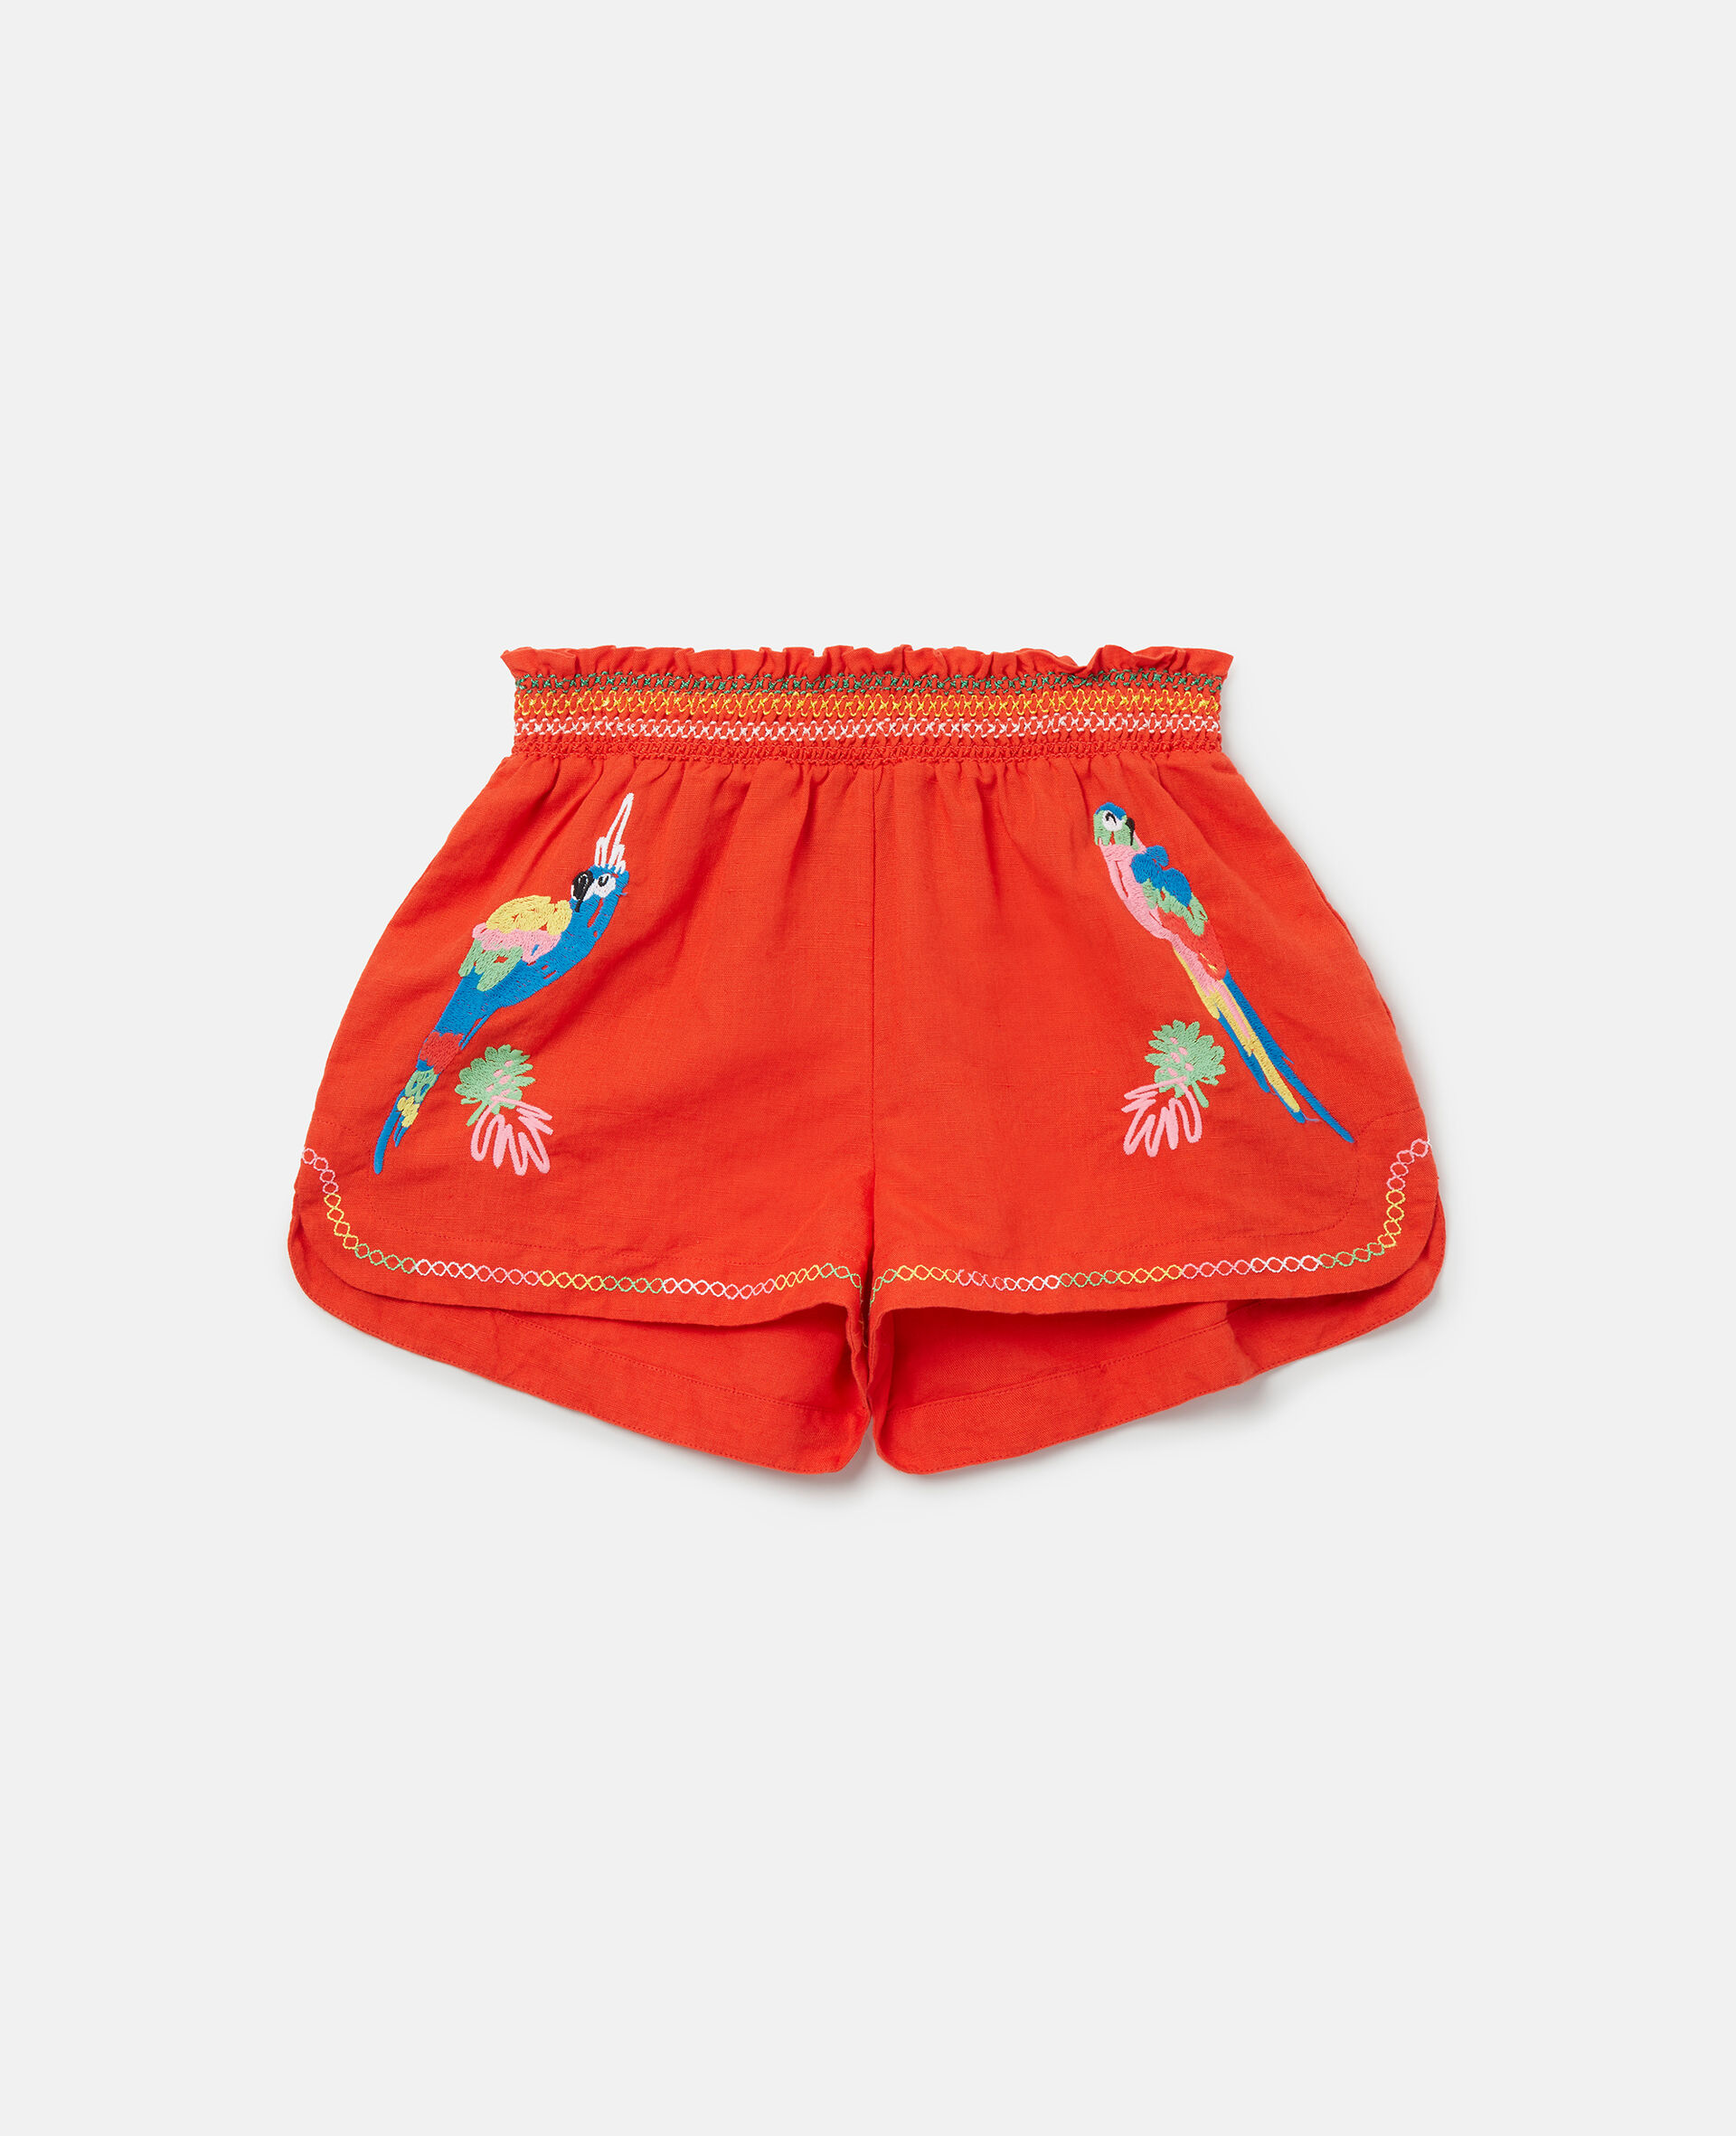 Parrot Embroidery Linen Shorts-Red-large image number 0